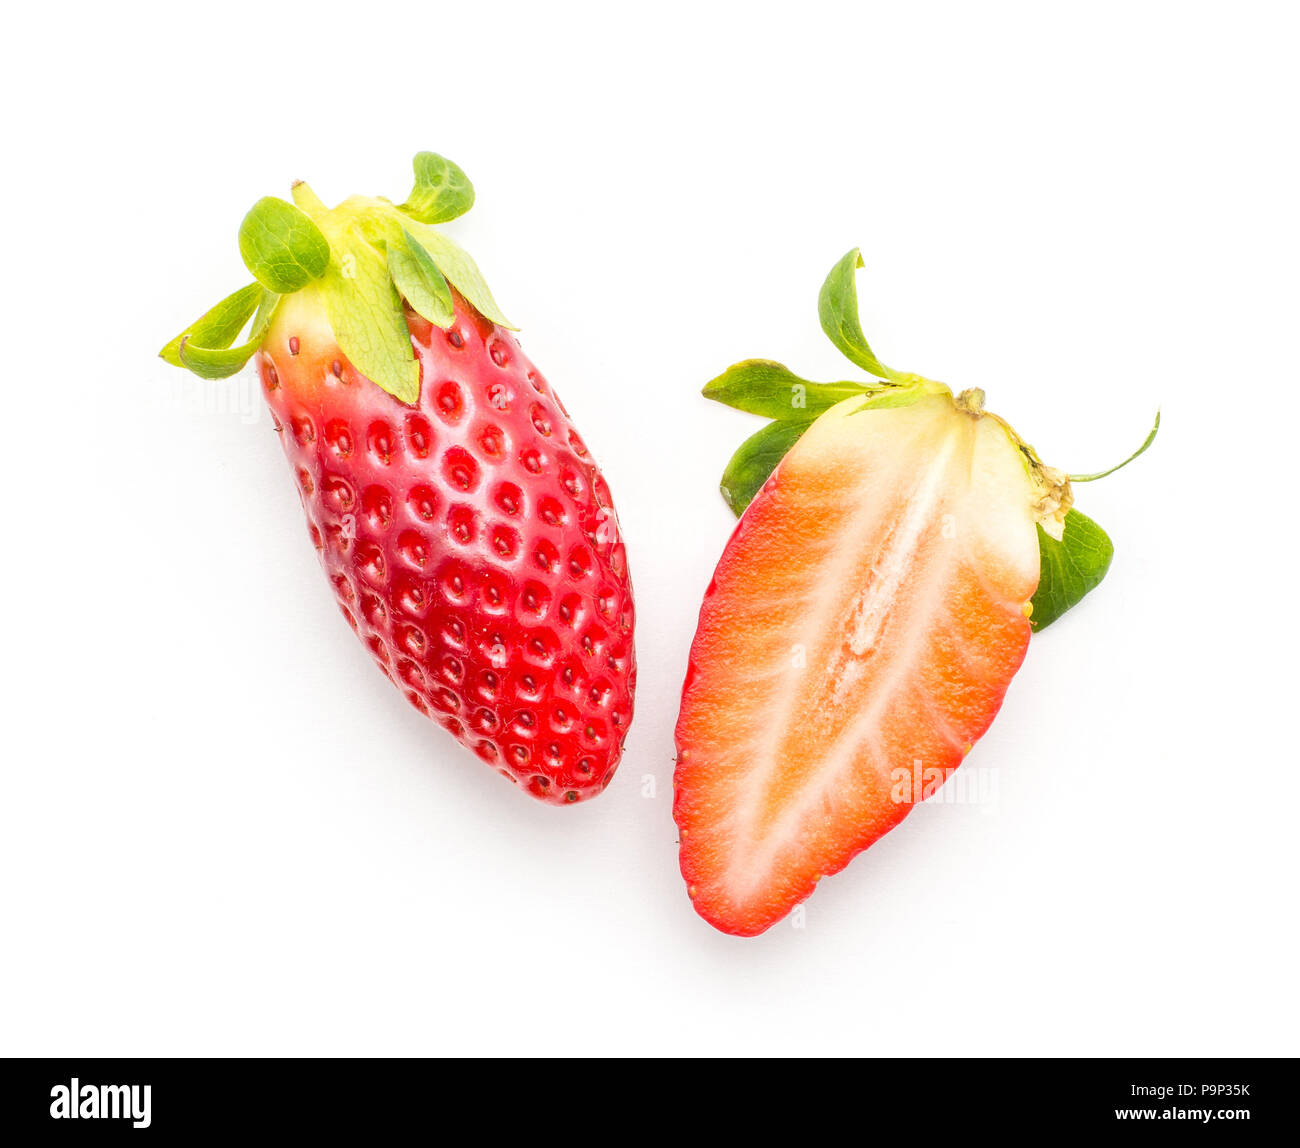 Garden strawberry top view one whole one section half compare isolated on white background Stock Photo